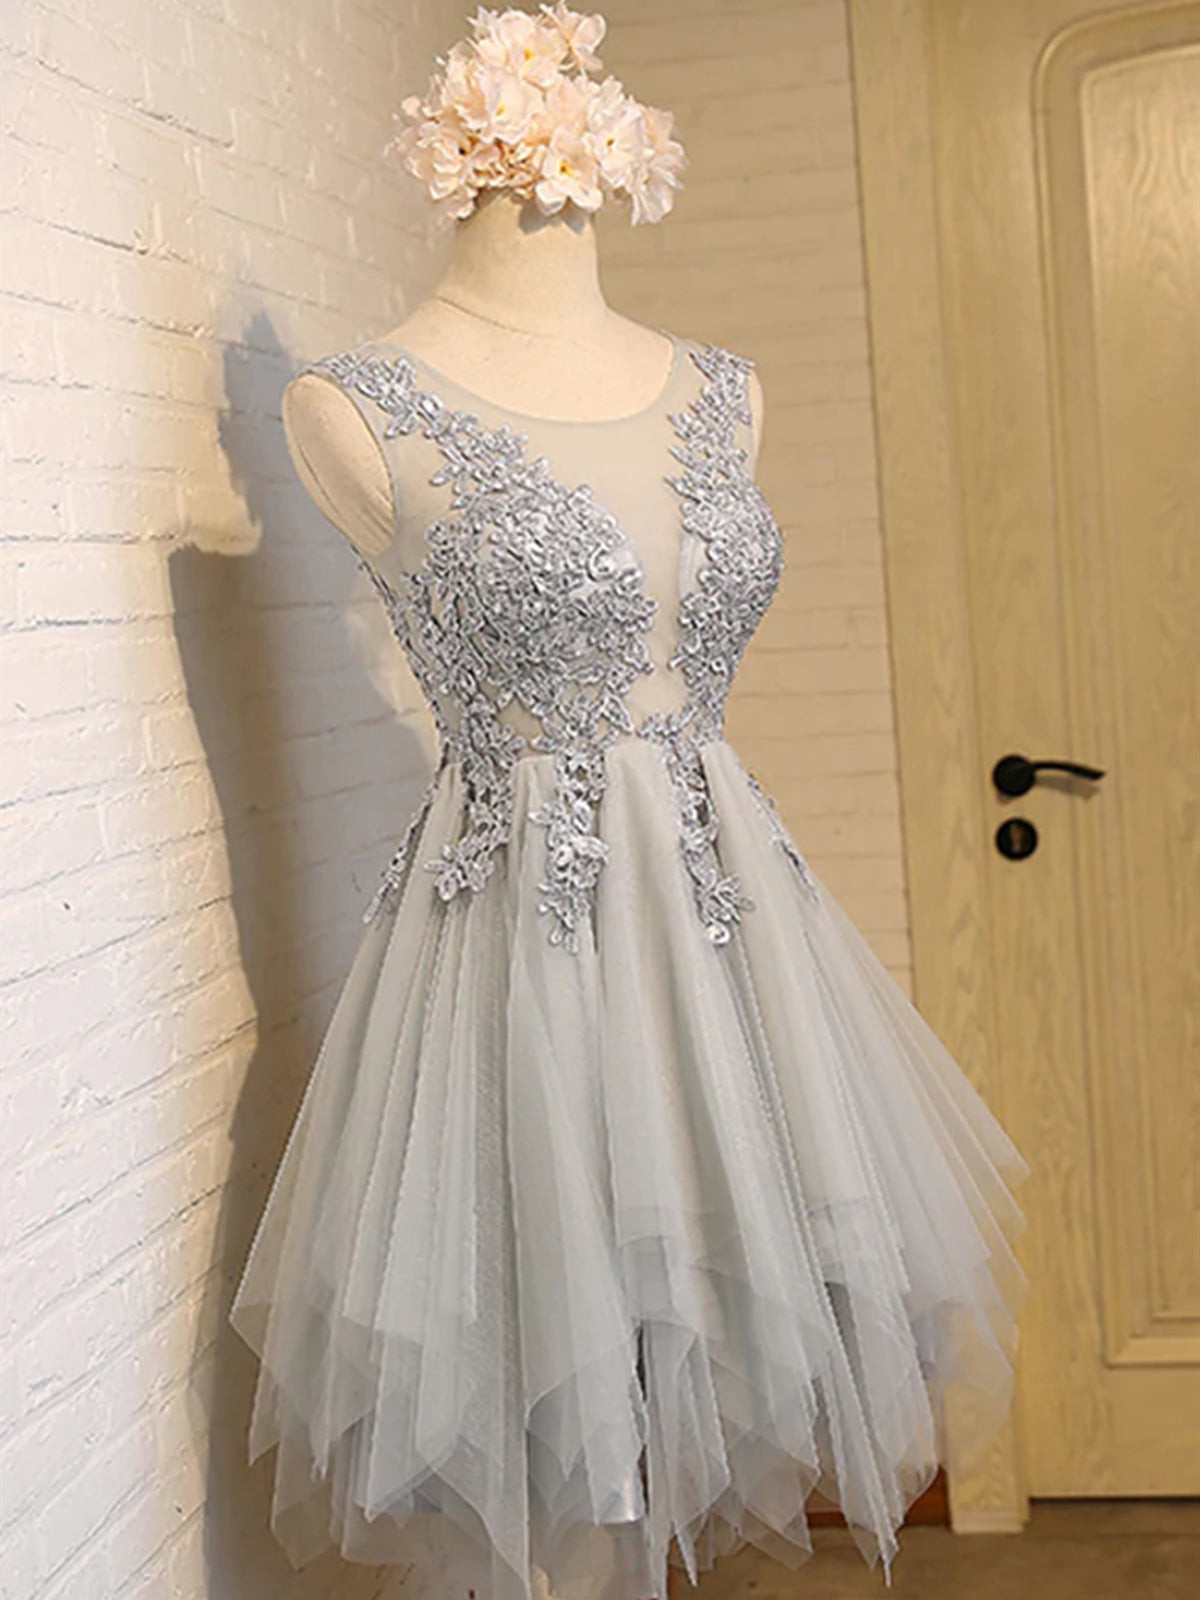 Round Neck Short Gray Lace Corset Prom Dresses, Short Grey Lace Corset Homecoming Dresses outfit, Party Dress Open Back